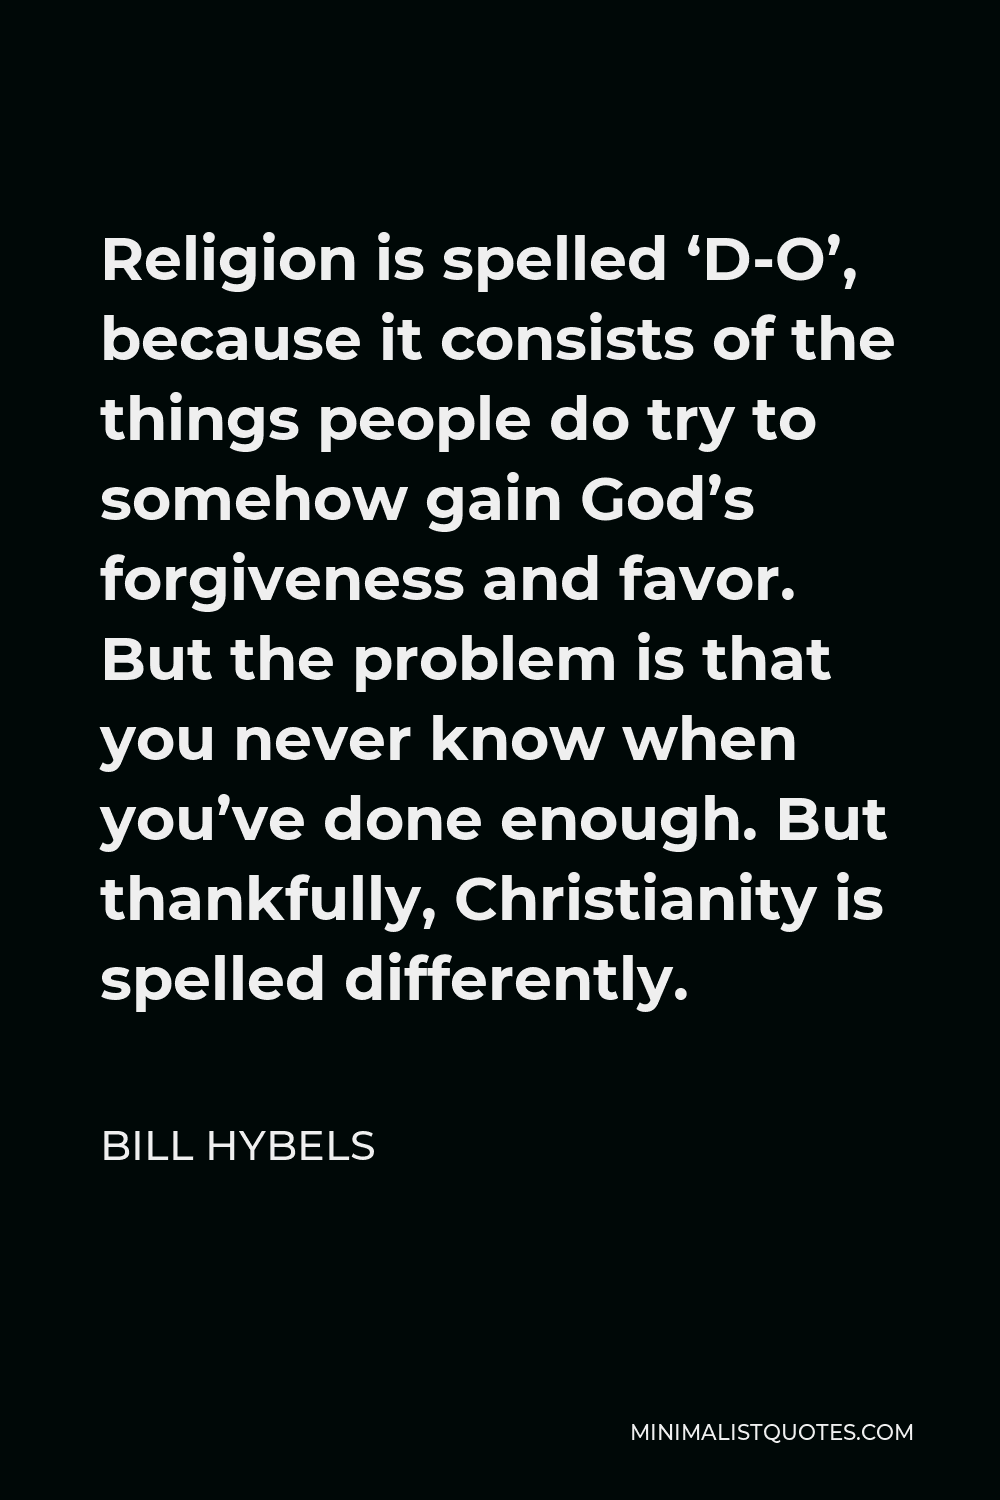 Bill Hybels Quote - Religion is spelled ‘D-O’, because it consists of the things people do try to somehow gain God’s forgiveness and favor. But the problem is that you never know when you’ve done enough. But thankfully, Christianity is spelled differently.